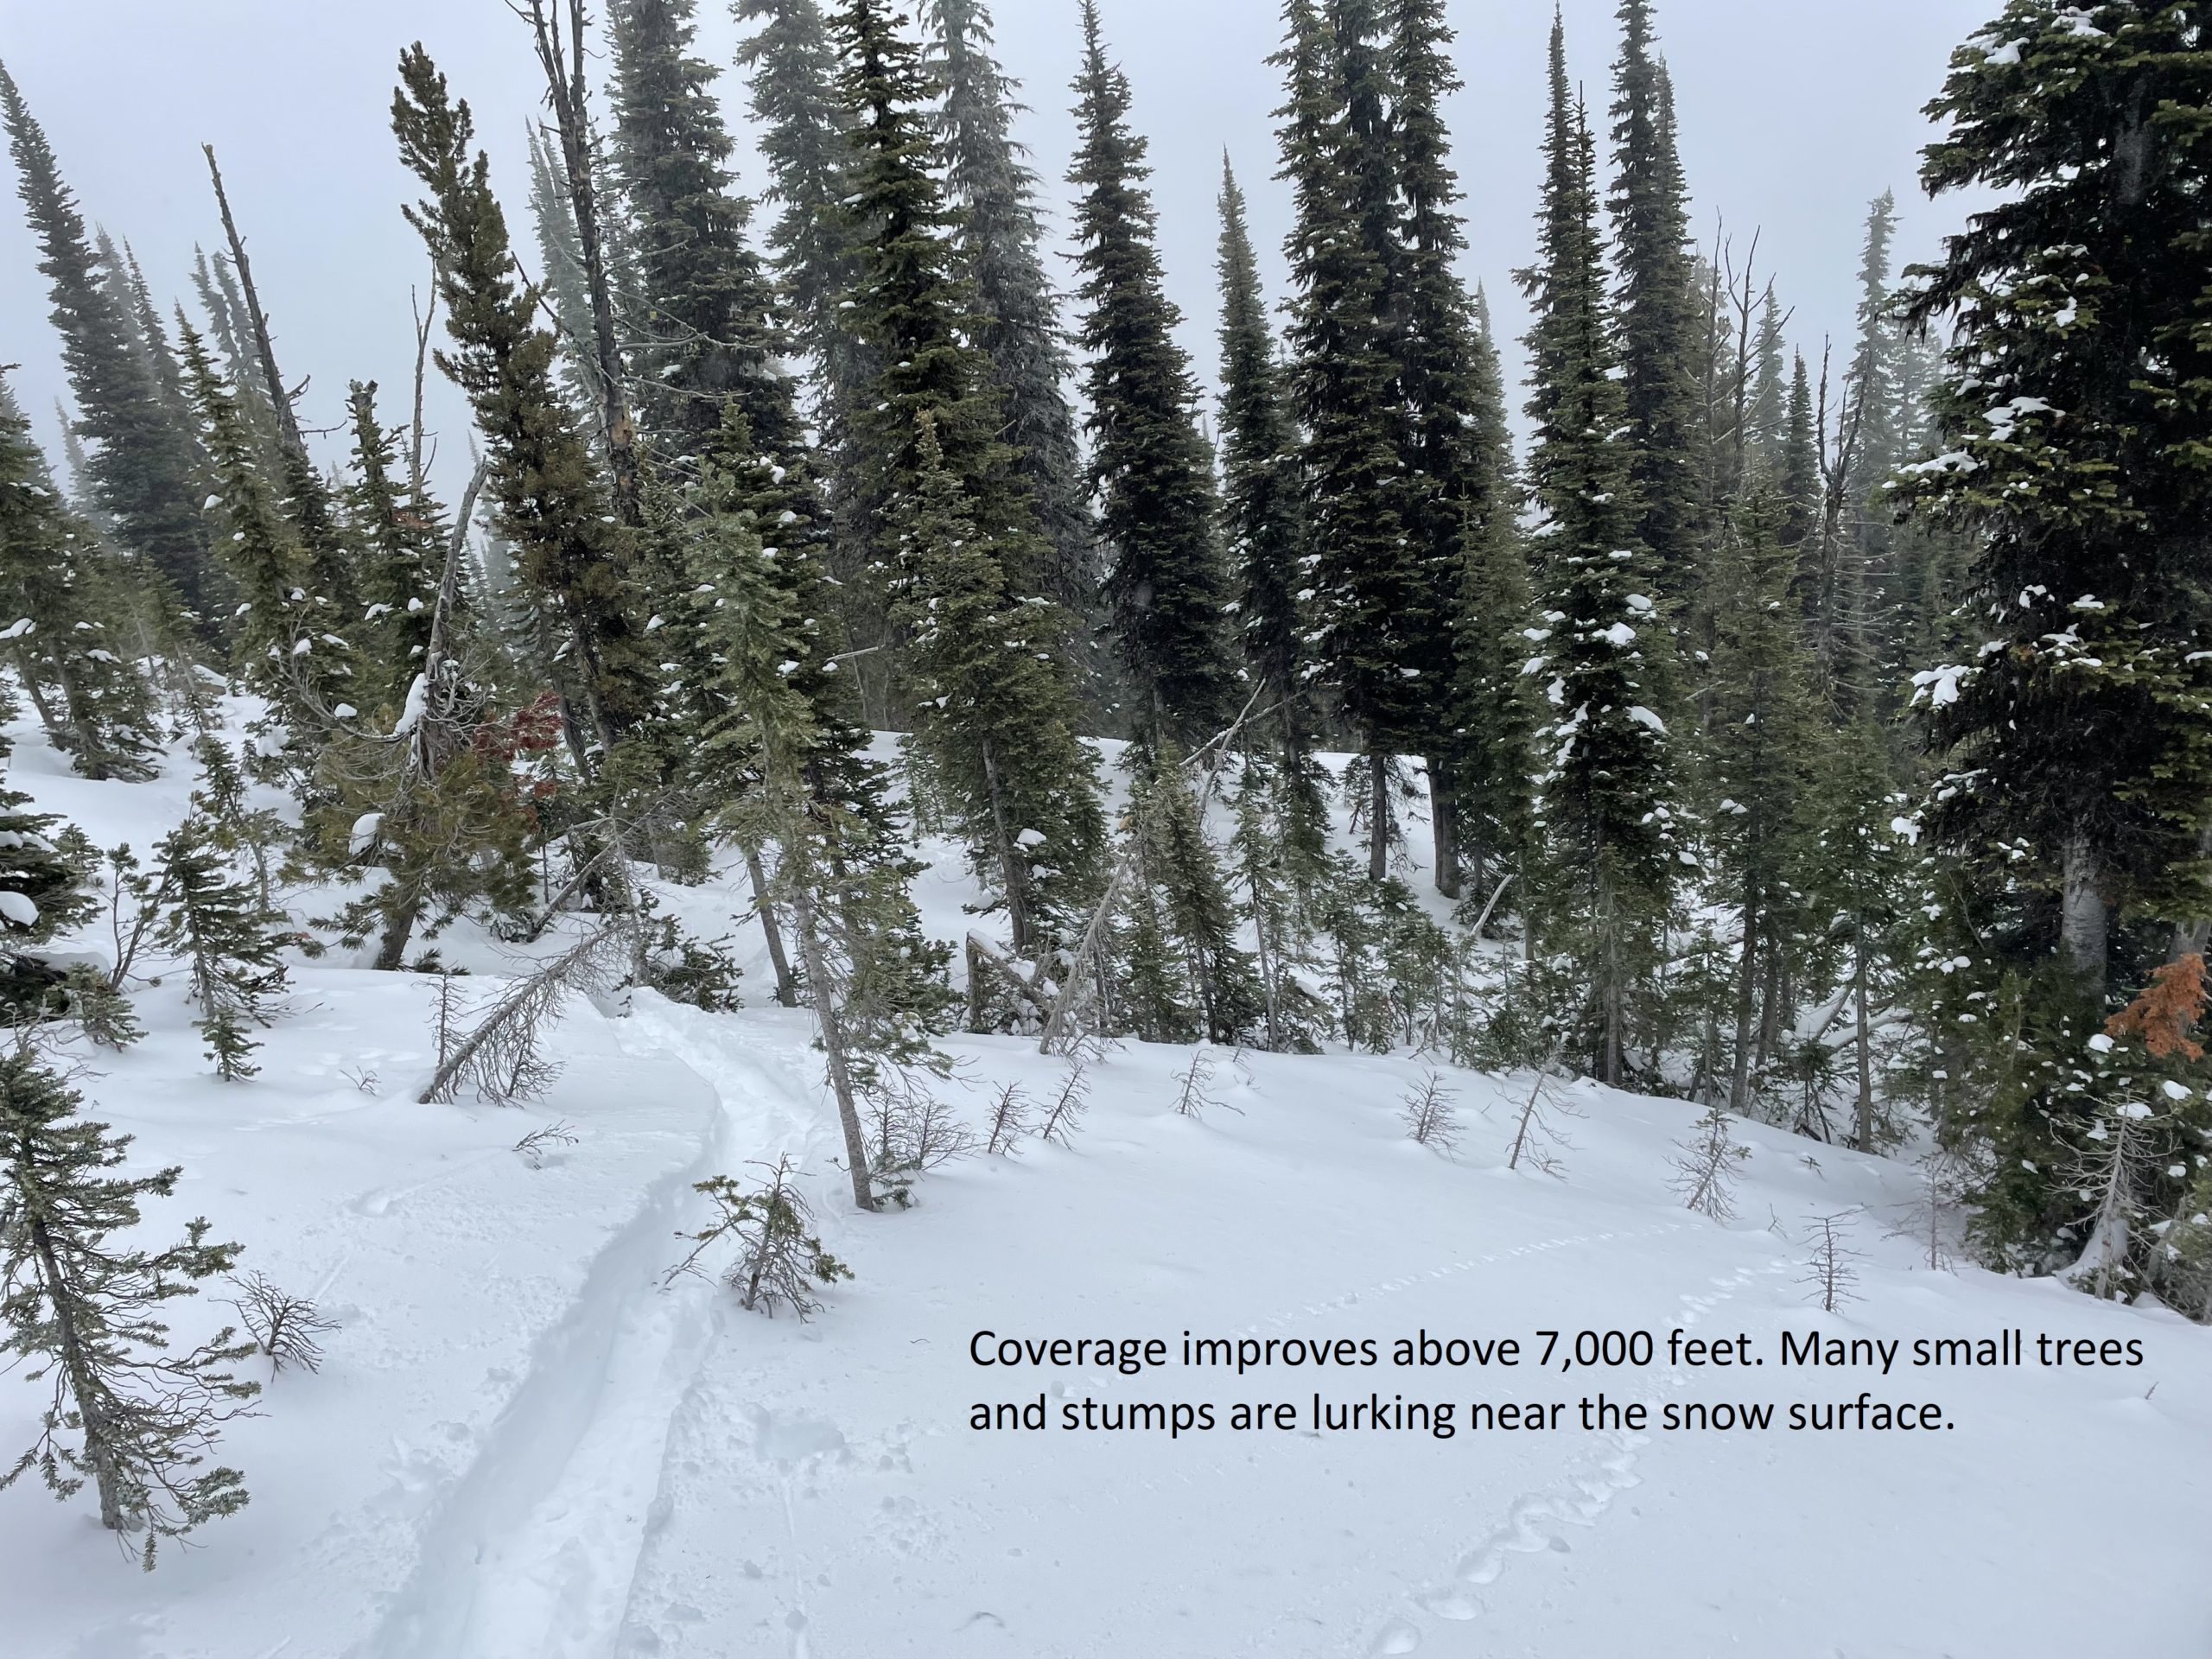 : <p>Coverage improves above 7,000 feet. However, many small trees and stumps are lurking near the snow surface. </p>
